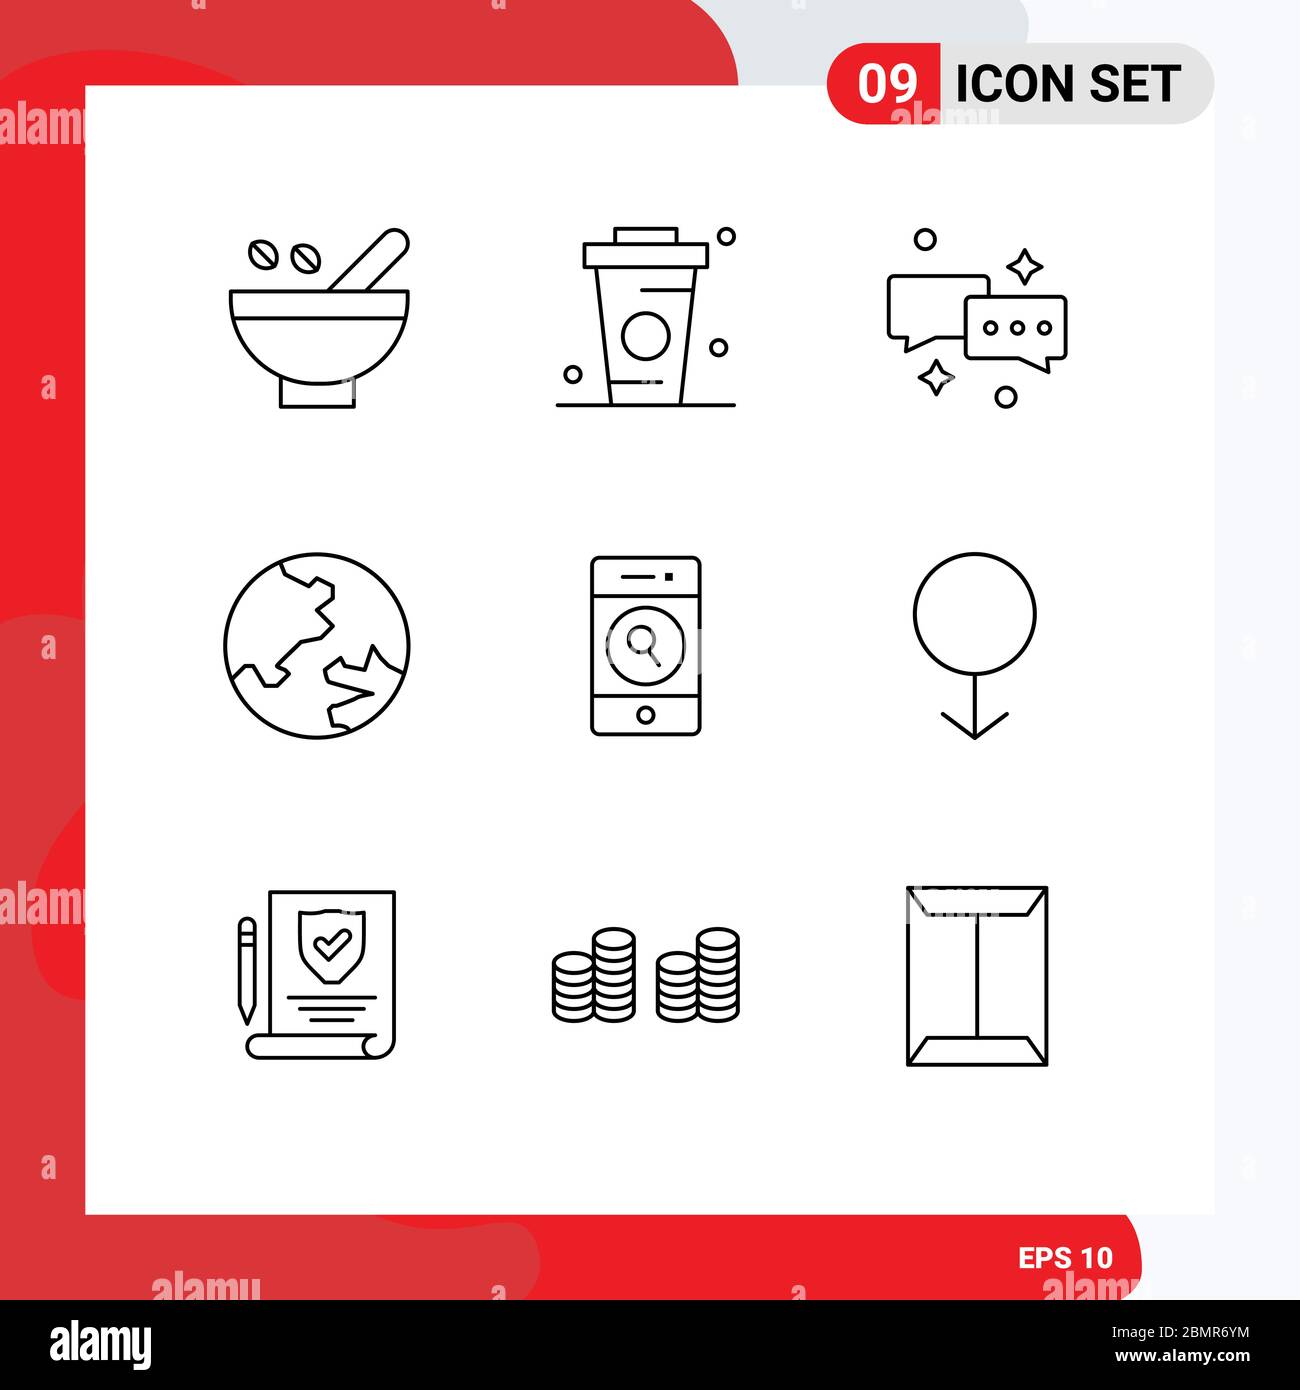 Mobile Interface Outline Set of 9 Pictograms of geography, earth, drink, email, chatting Editable Vector Design Elements Stock Vector